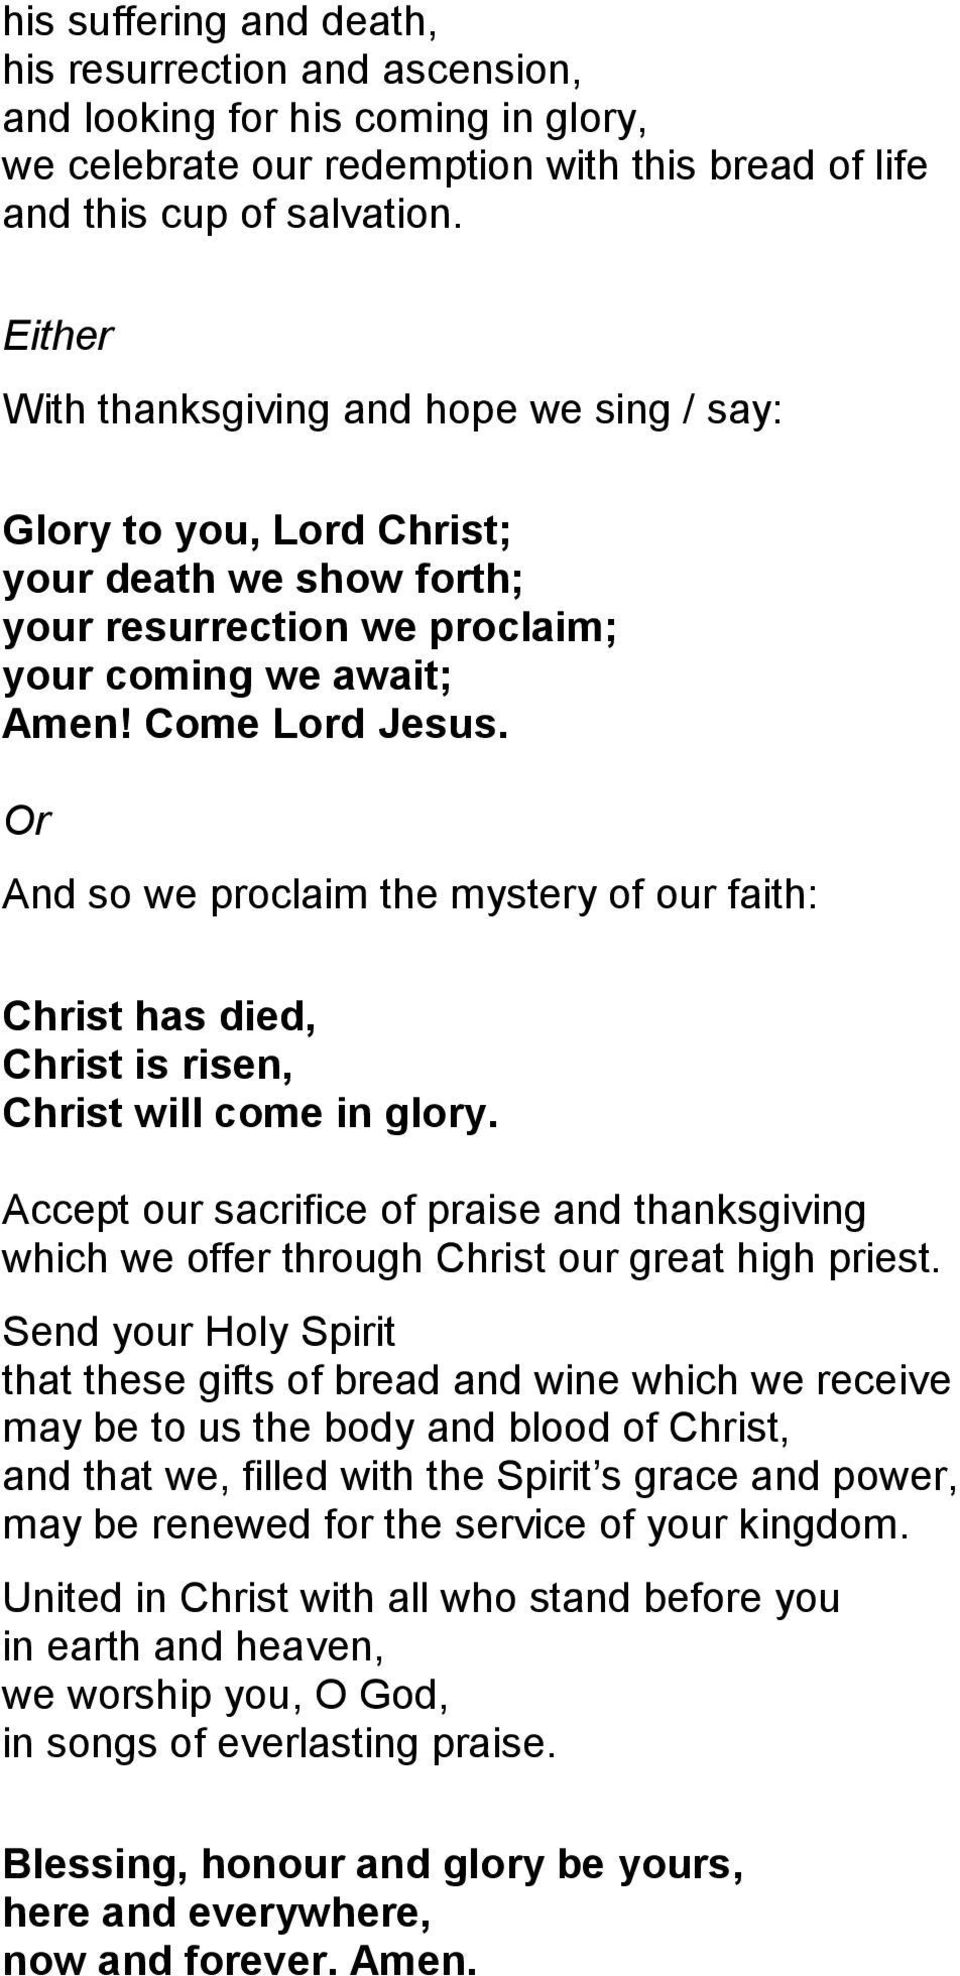 Or And so we proclaim the mystery of our faith: Christ has died, Christ is risen, Christ will come in glory.